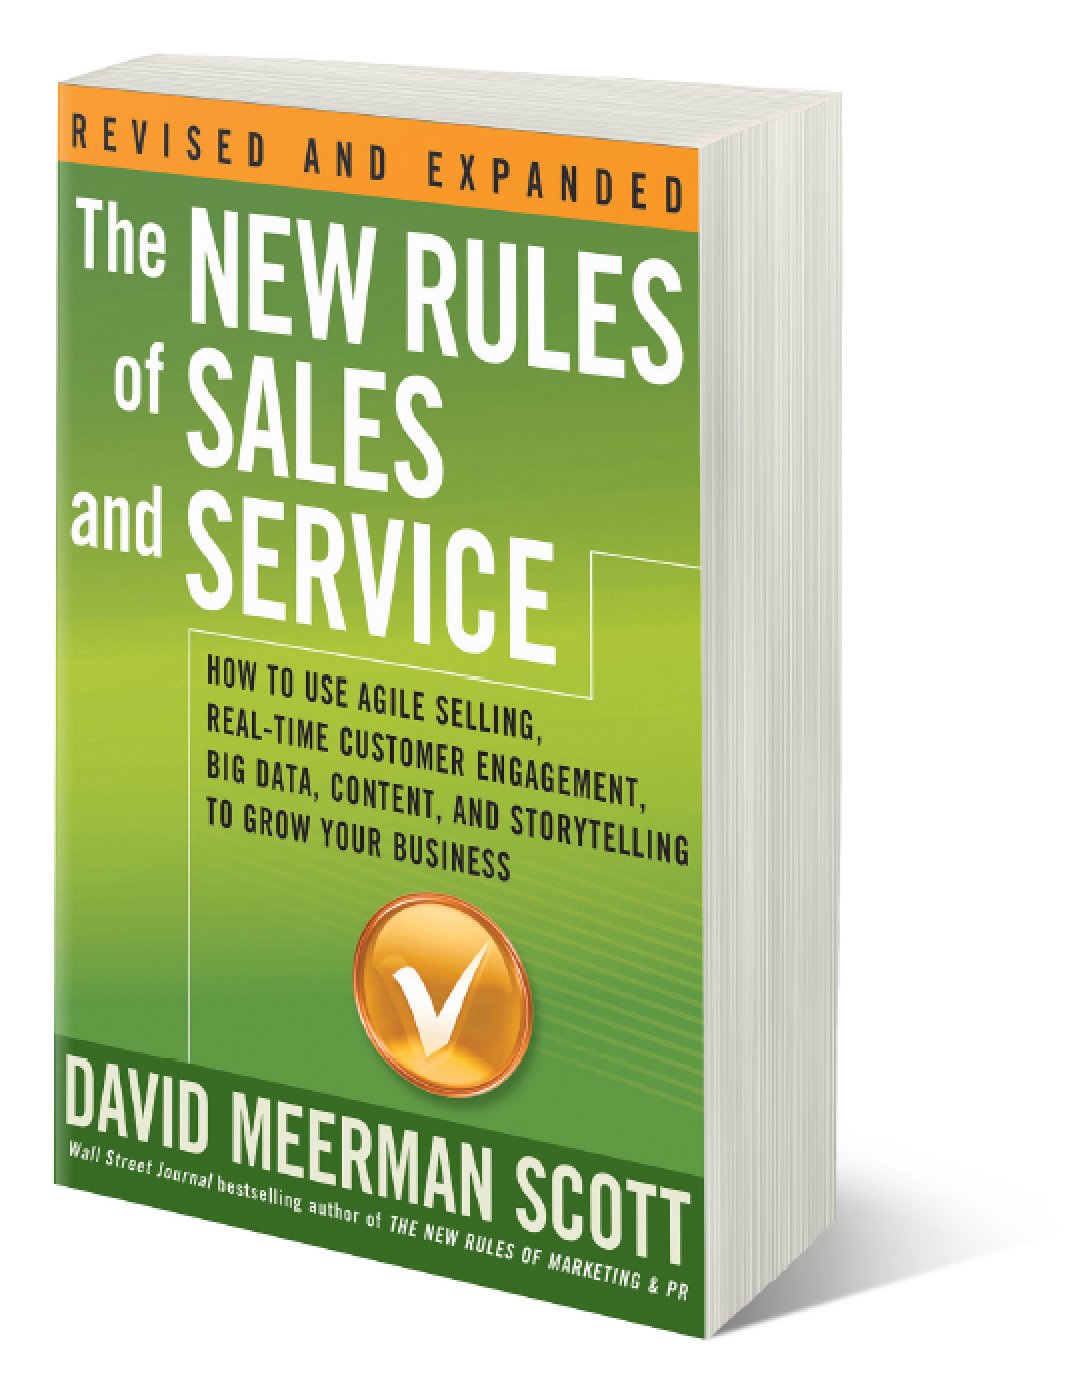 The New Rules of Sales and Service | David Meerman Scott